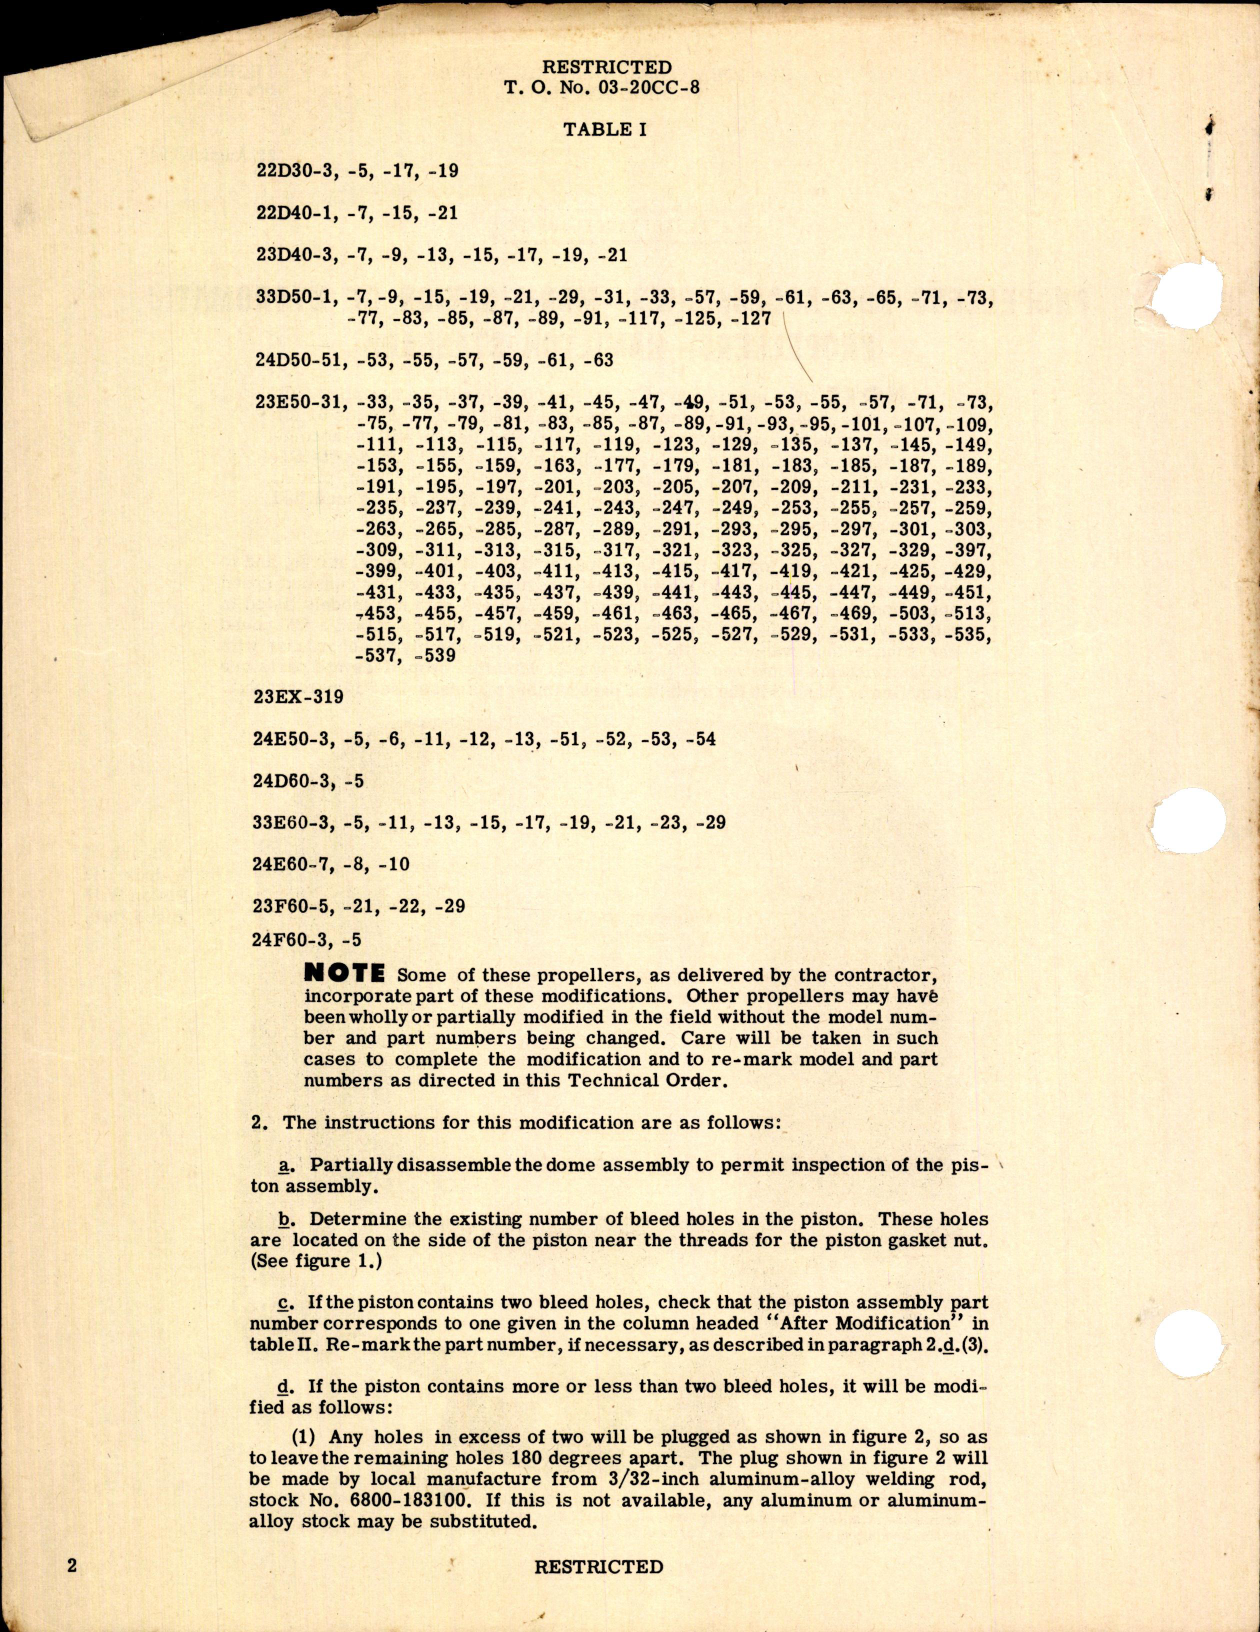 Sample page 2 from AirCorps Library document: Modification of Hydromatic Propellers